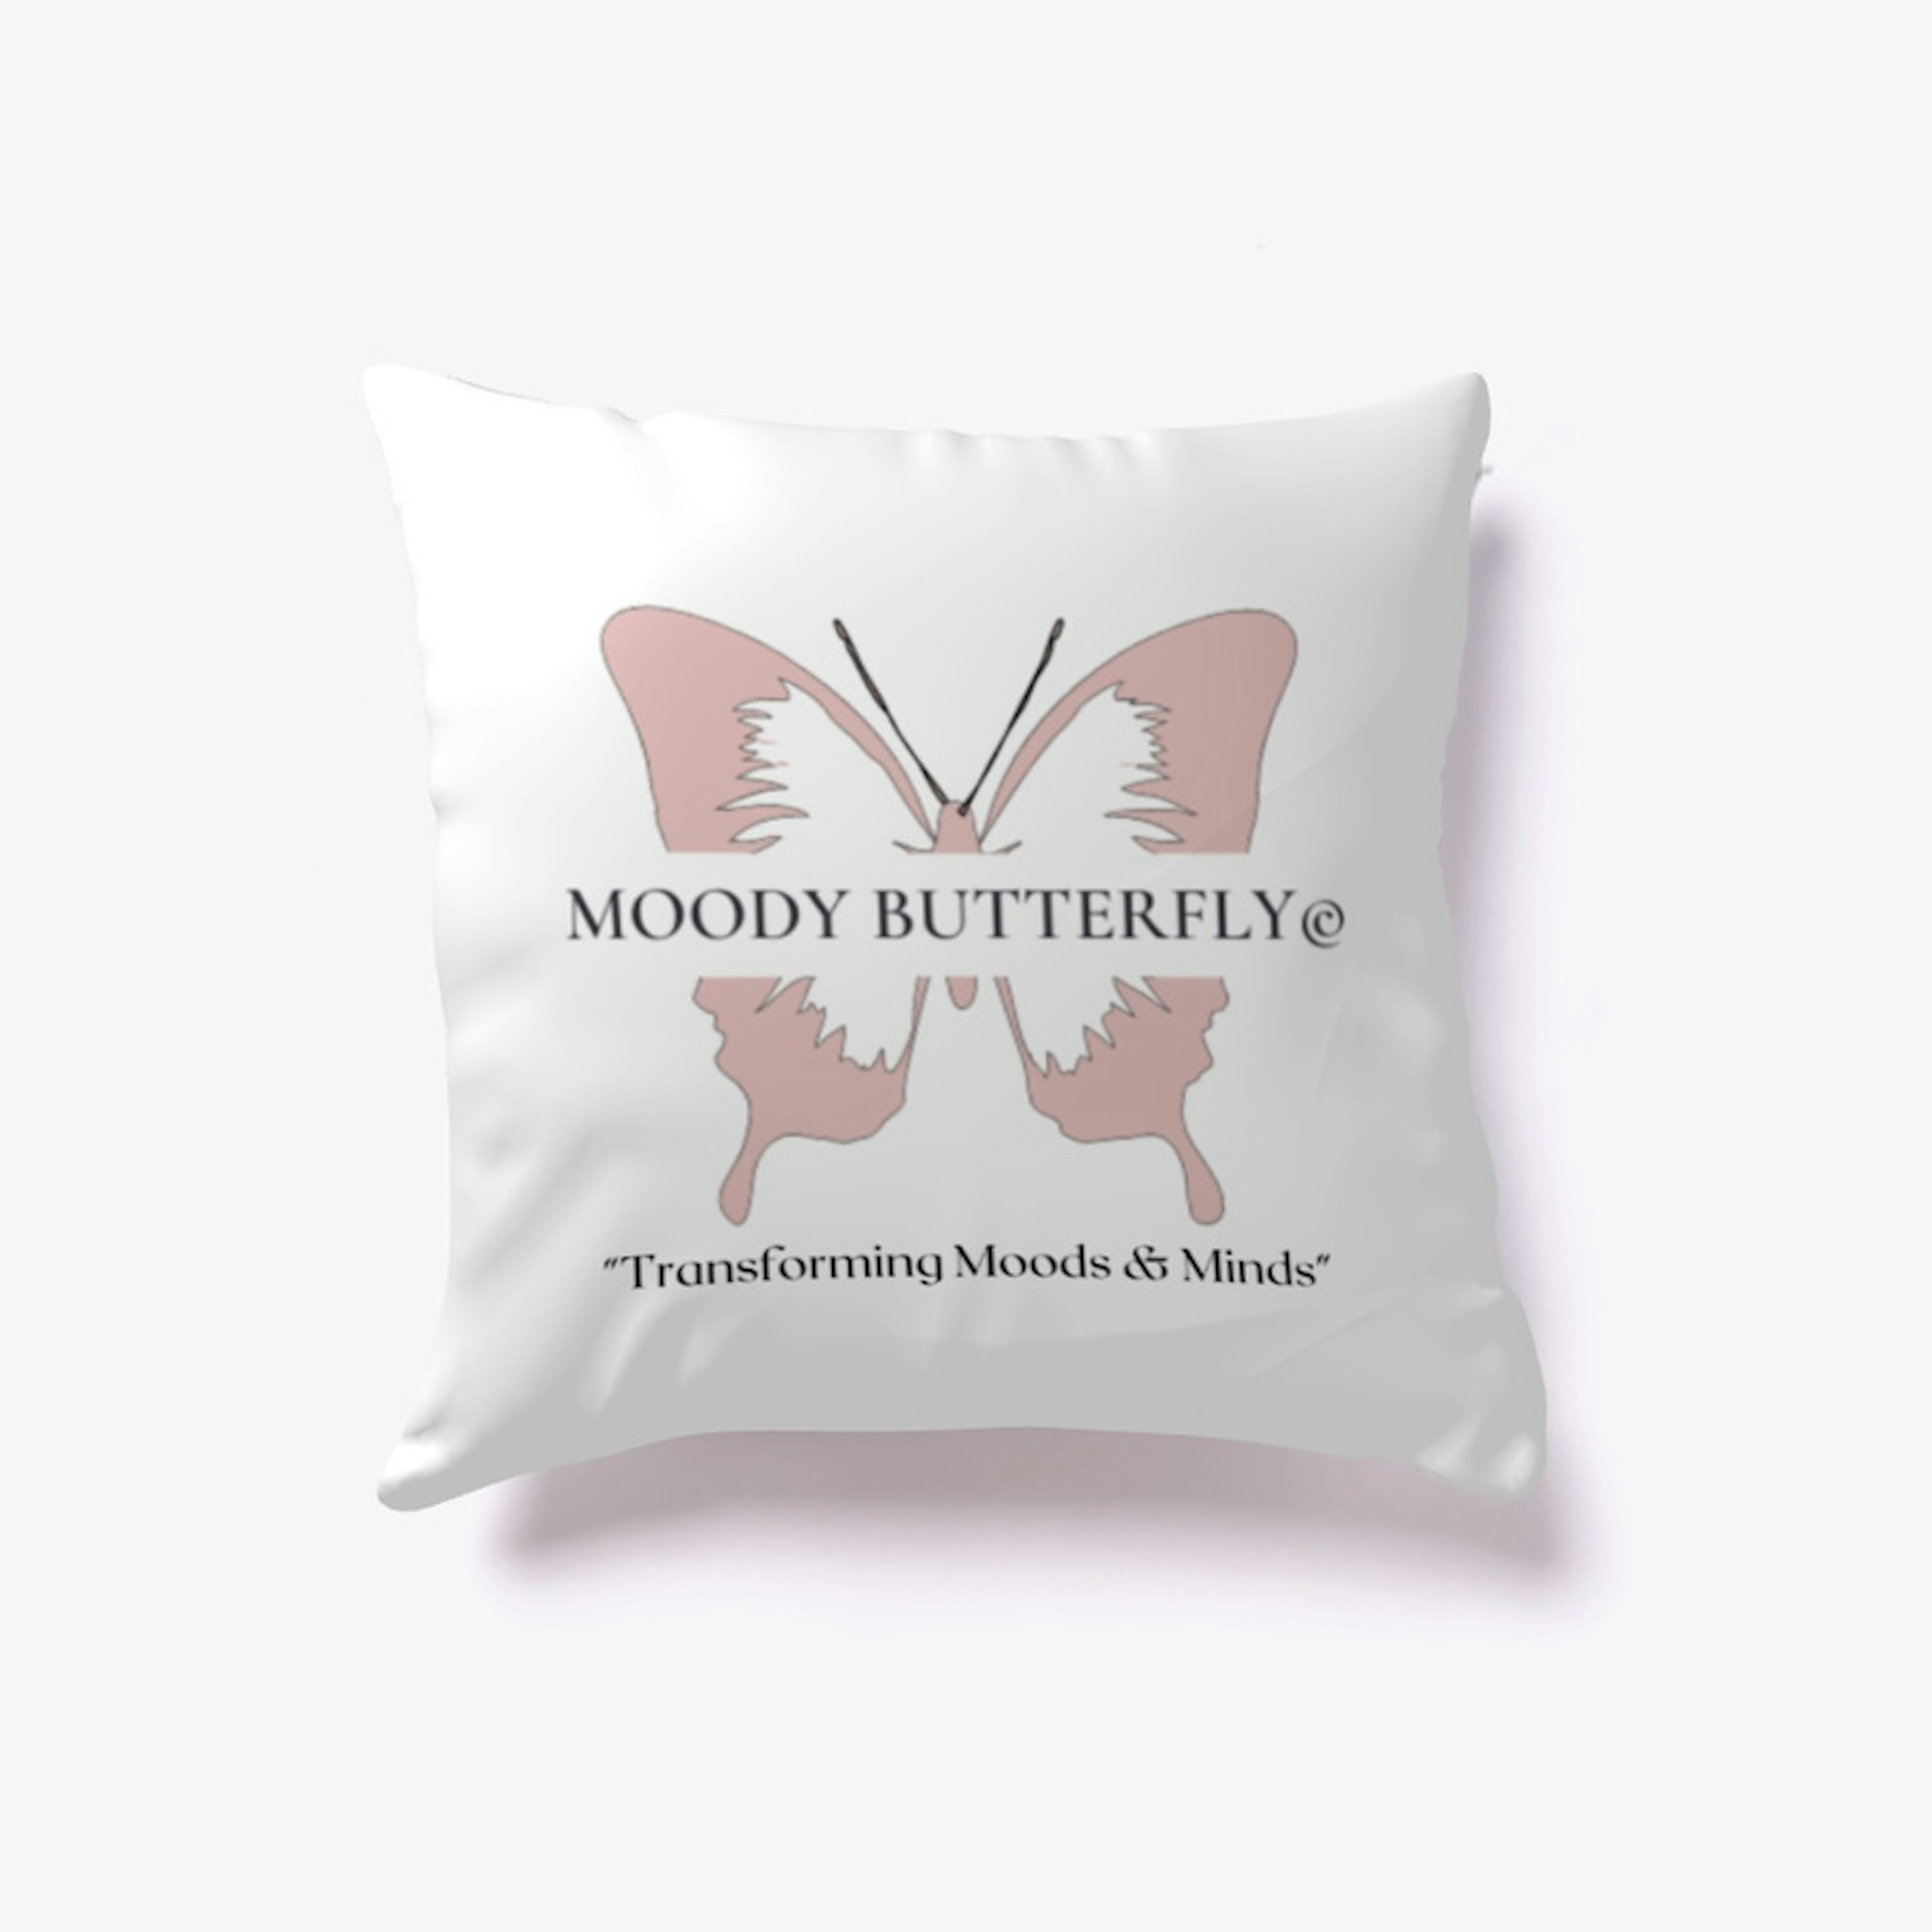 Moody Butterfly Signature Merch